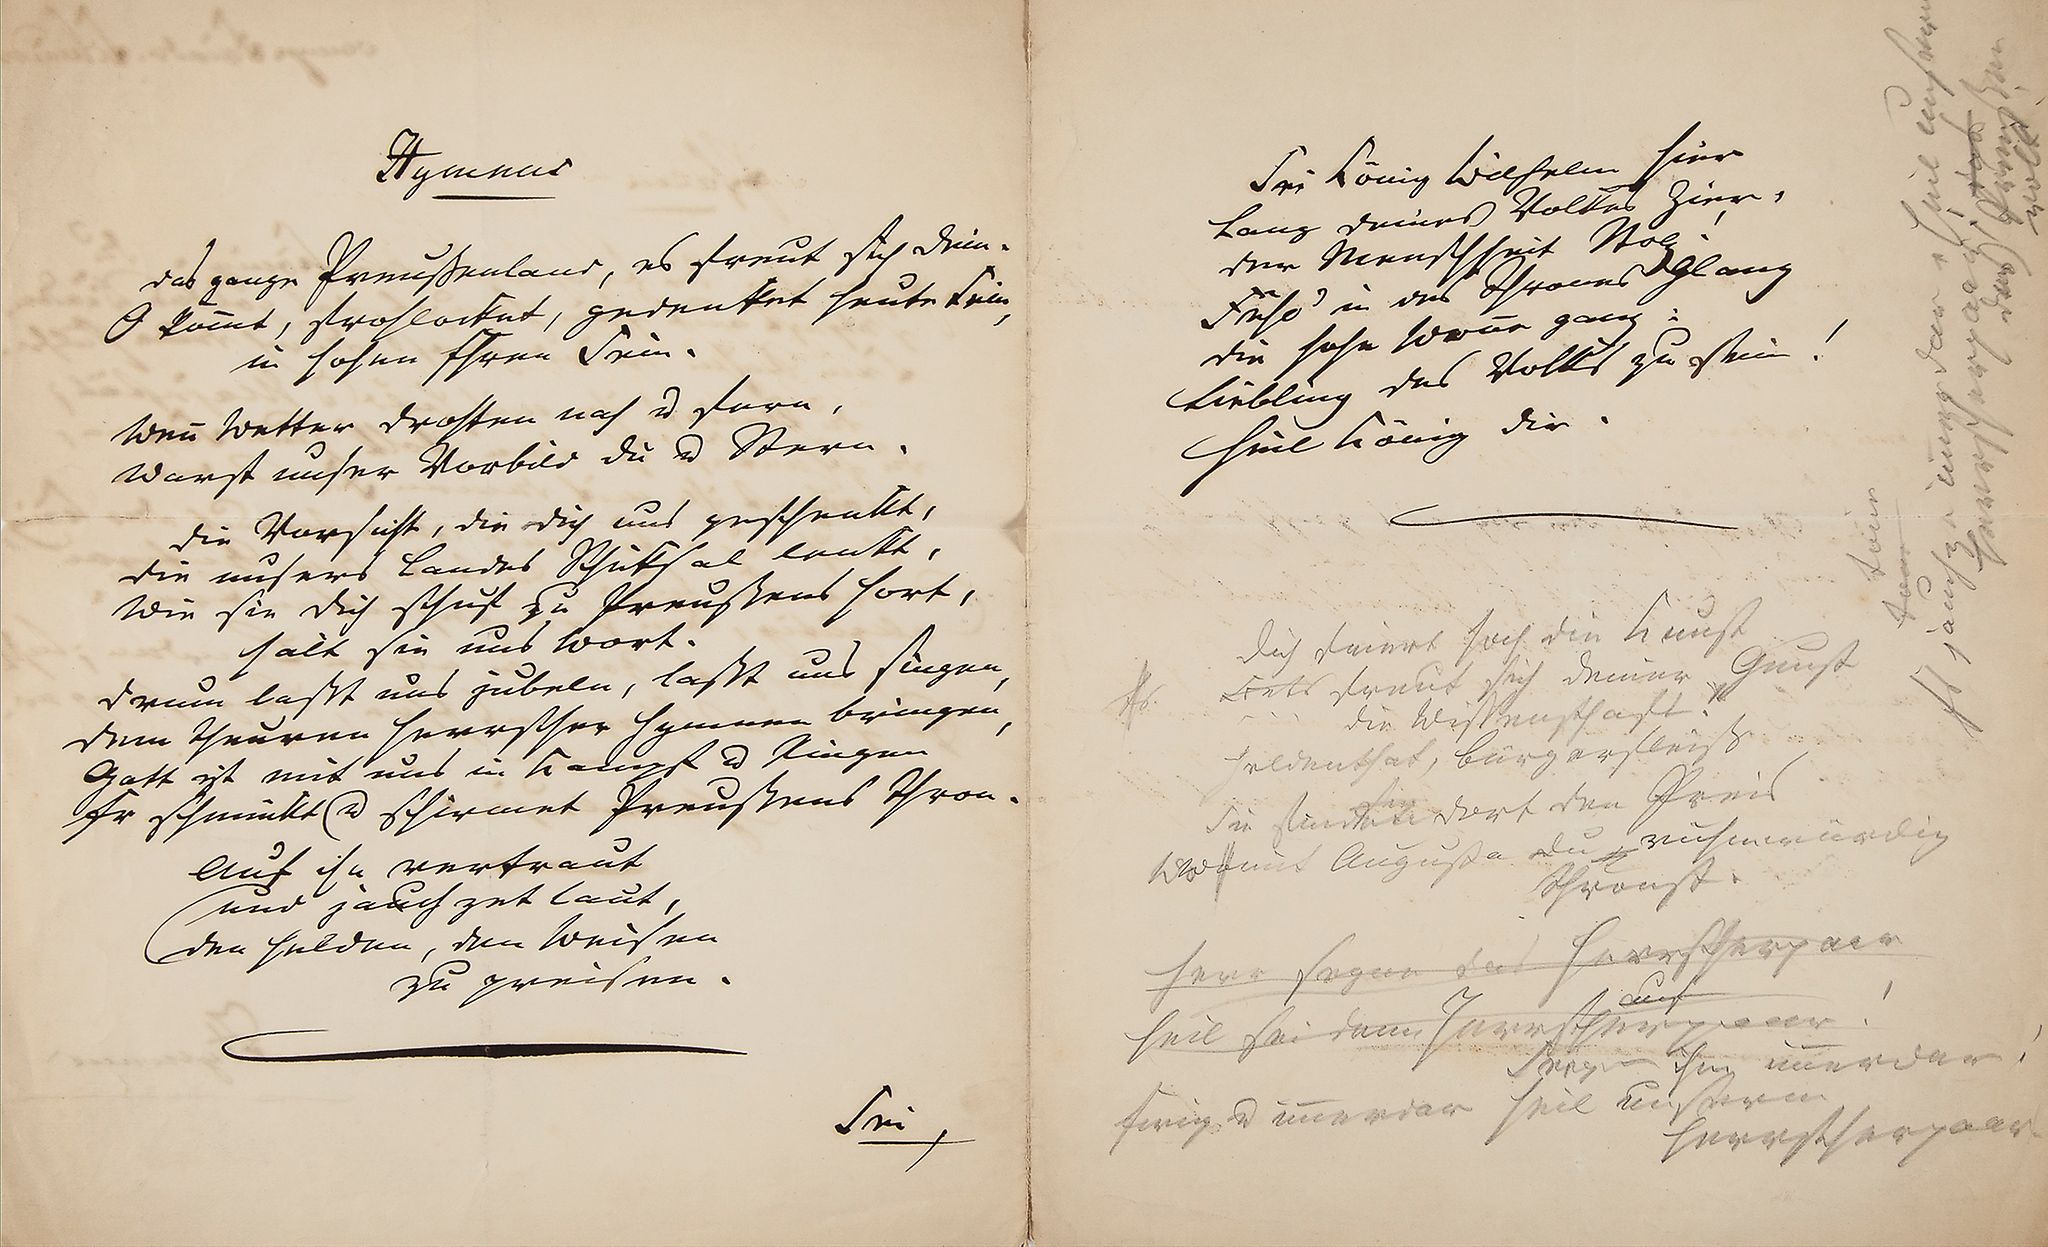 BACH, AUGUST WILHELM - Autograph transcript of a psalm and hymn, in German, in Bach's hand Autograph